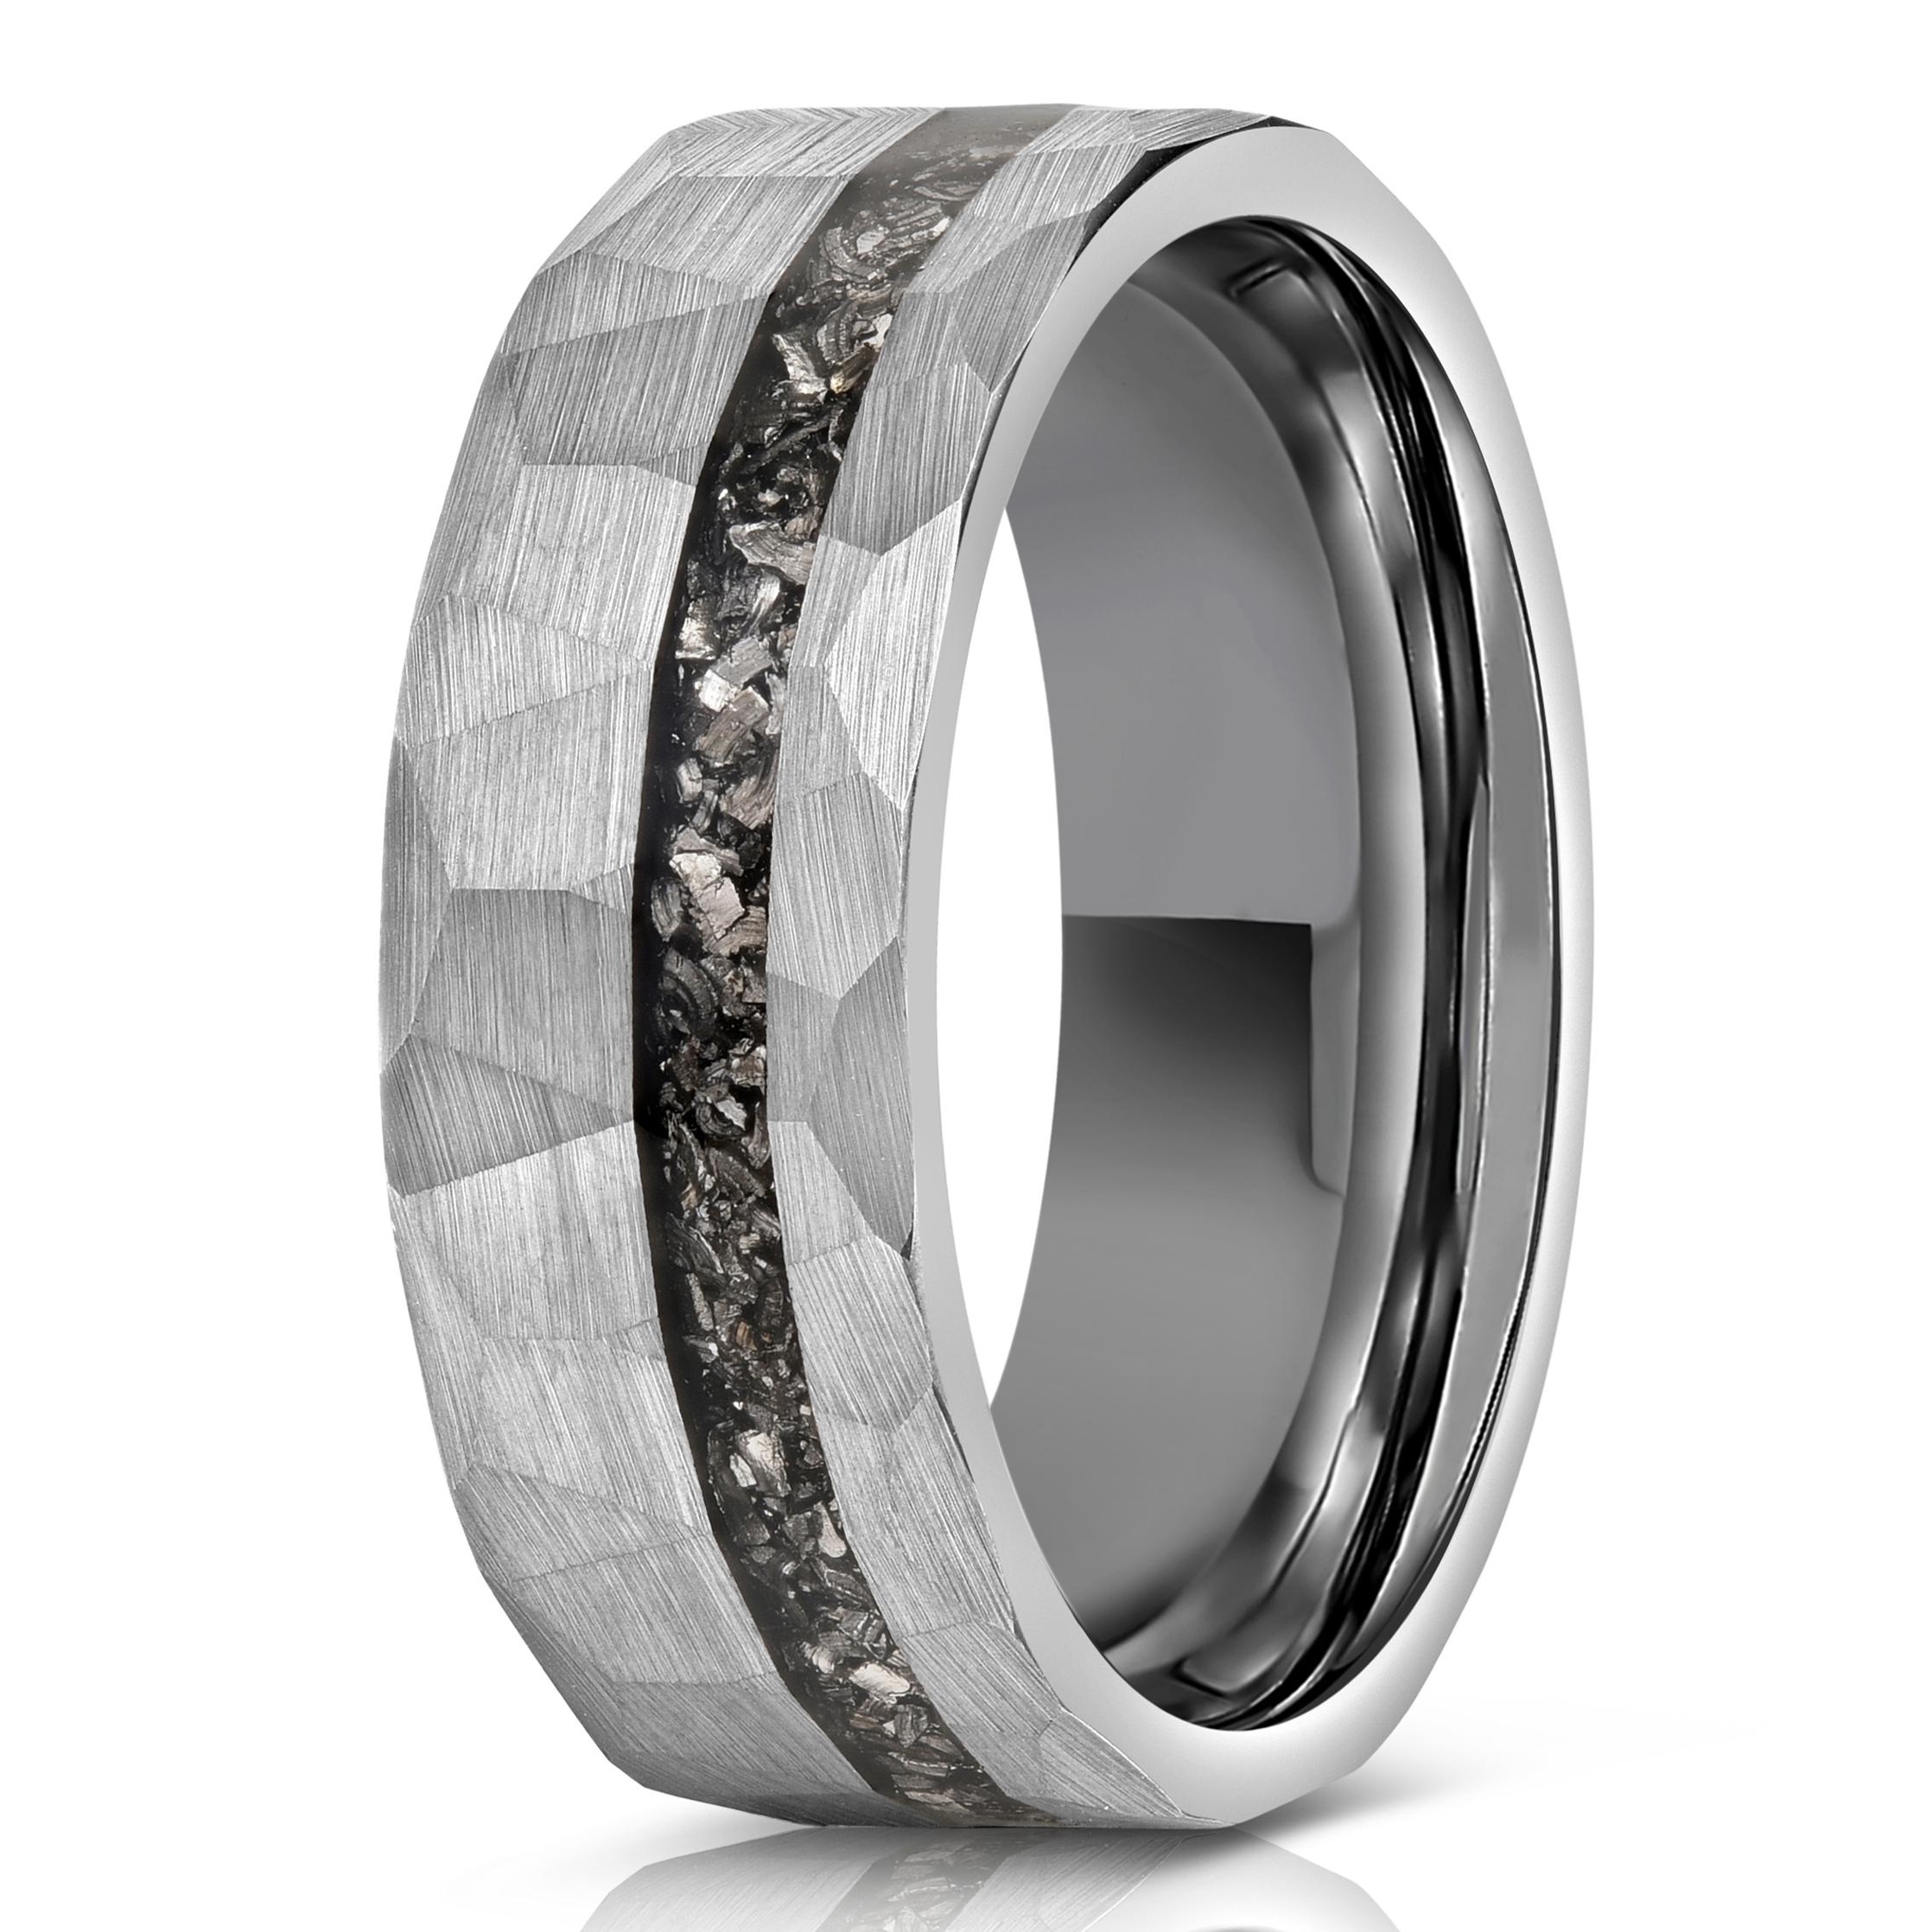 THREE KEYS JEWELRY Men Wedding Hunting 8mm Bands Tungsten Viking Carbide  Meteorite Ring With Jewels PolishInfinity Unique For Him Silver Size 10 on  Galleon Philippines